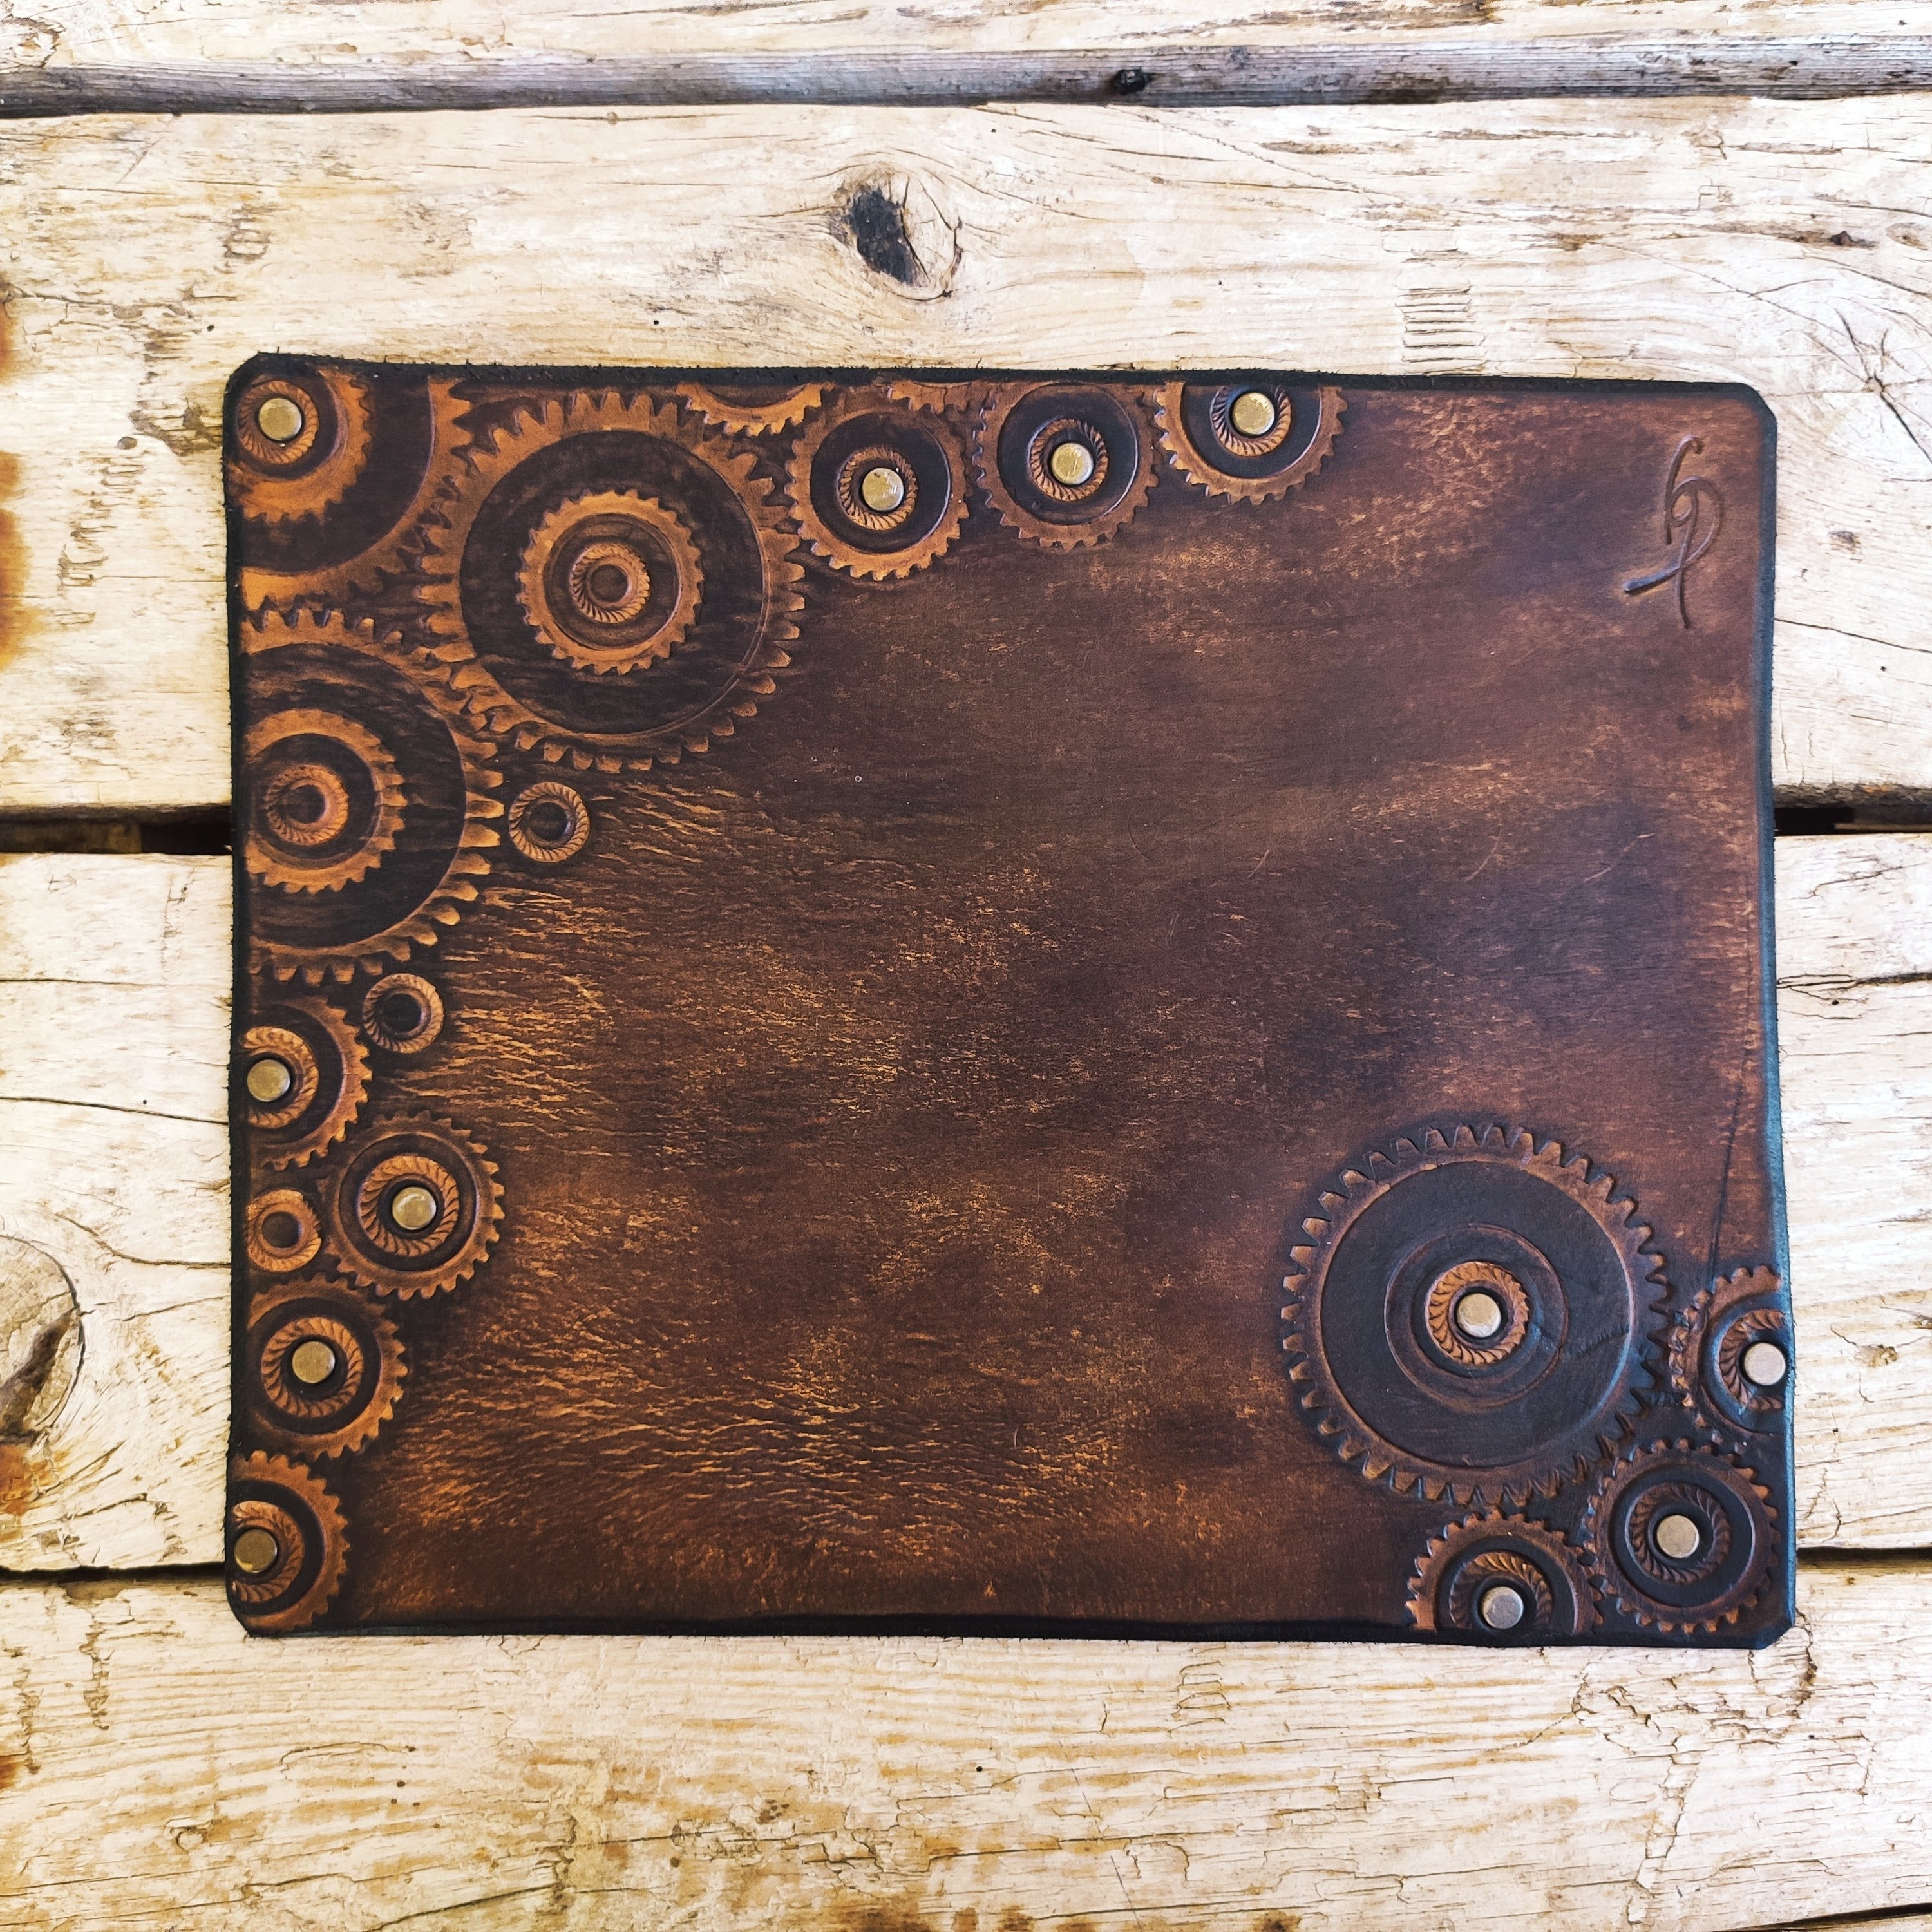 Leather mouse pad with gear stamps